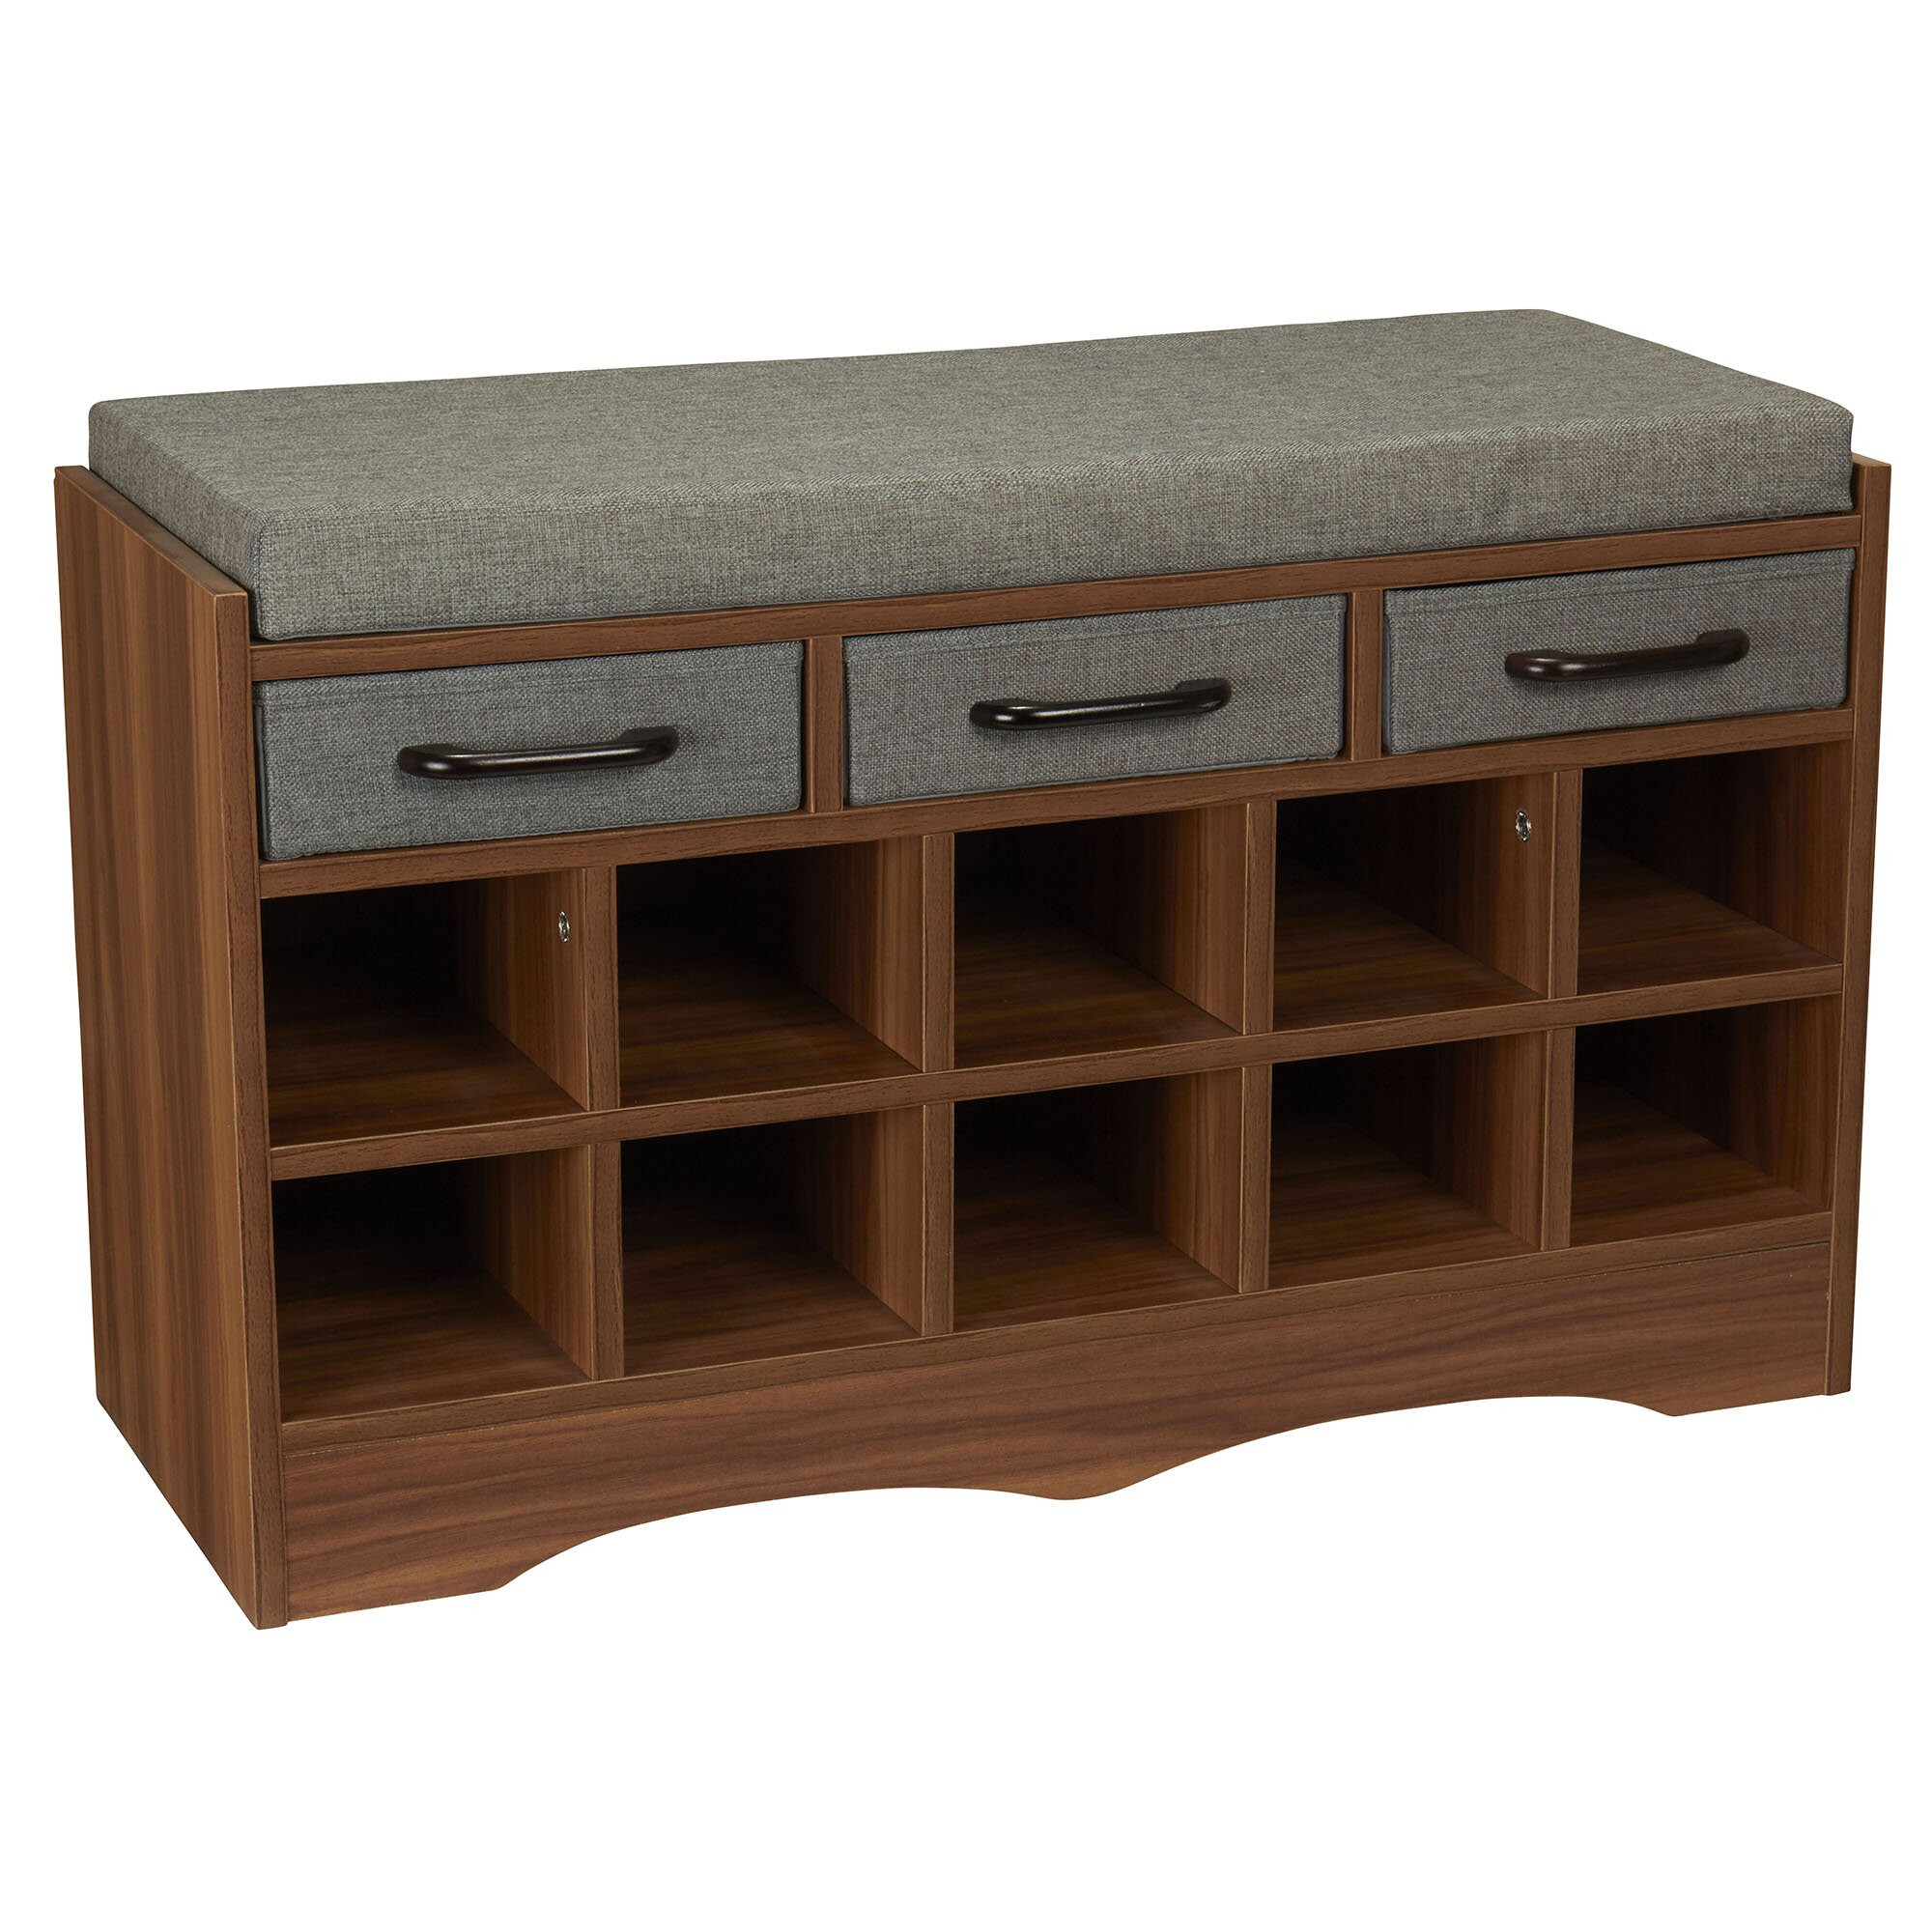 Bench Shoe Storage
 Household Essentials Entryway Shoe Storage Bench & Reviews